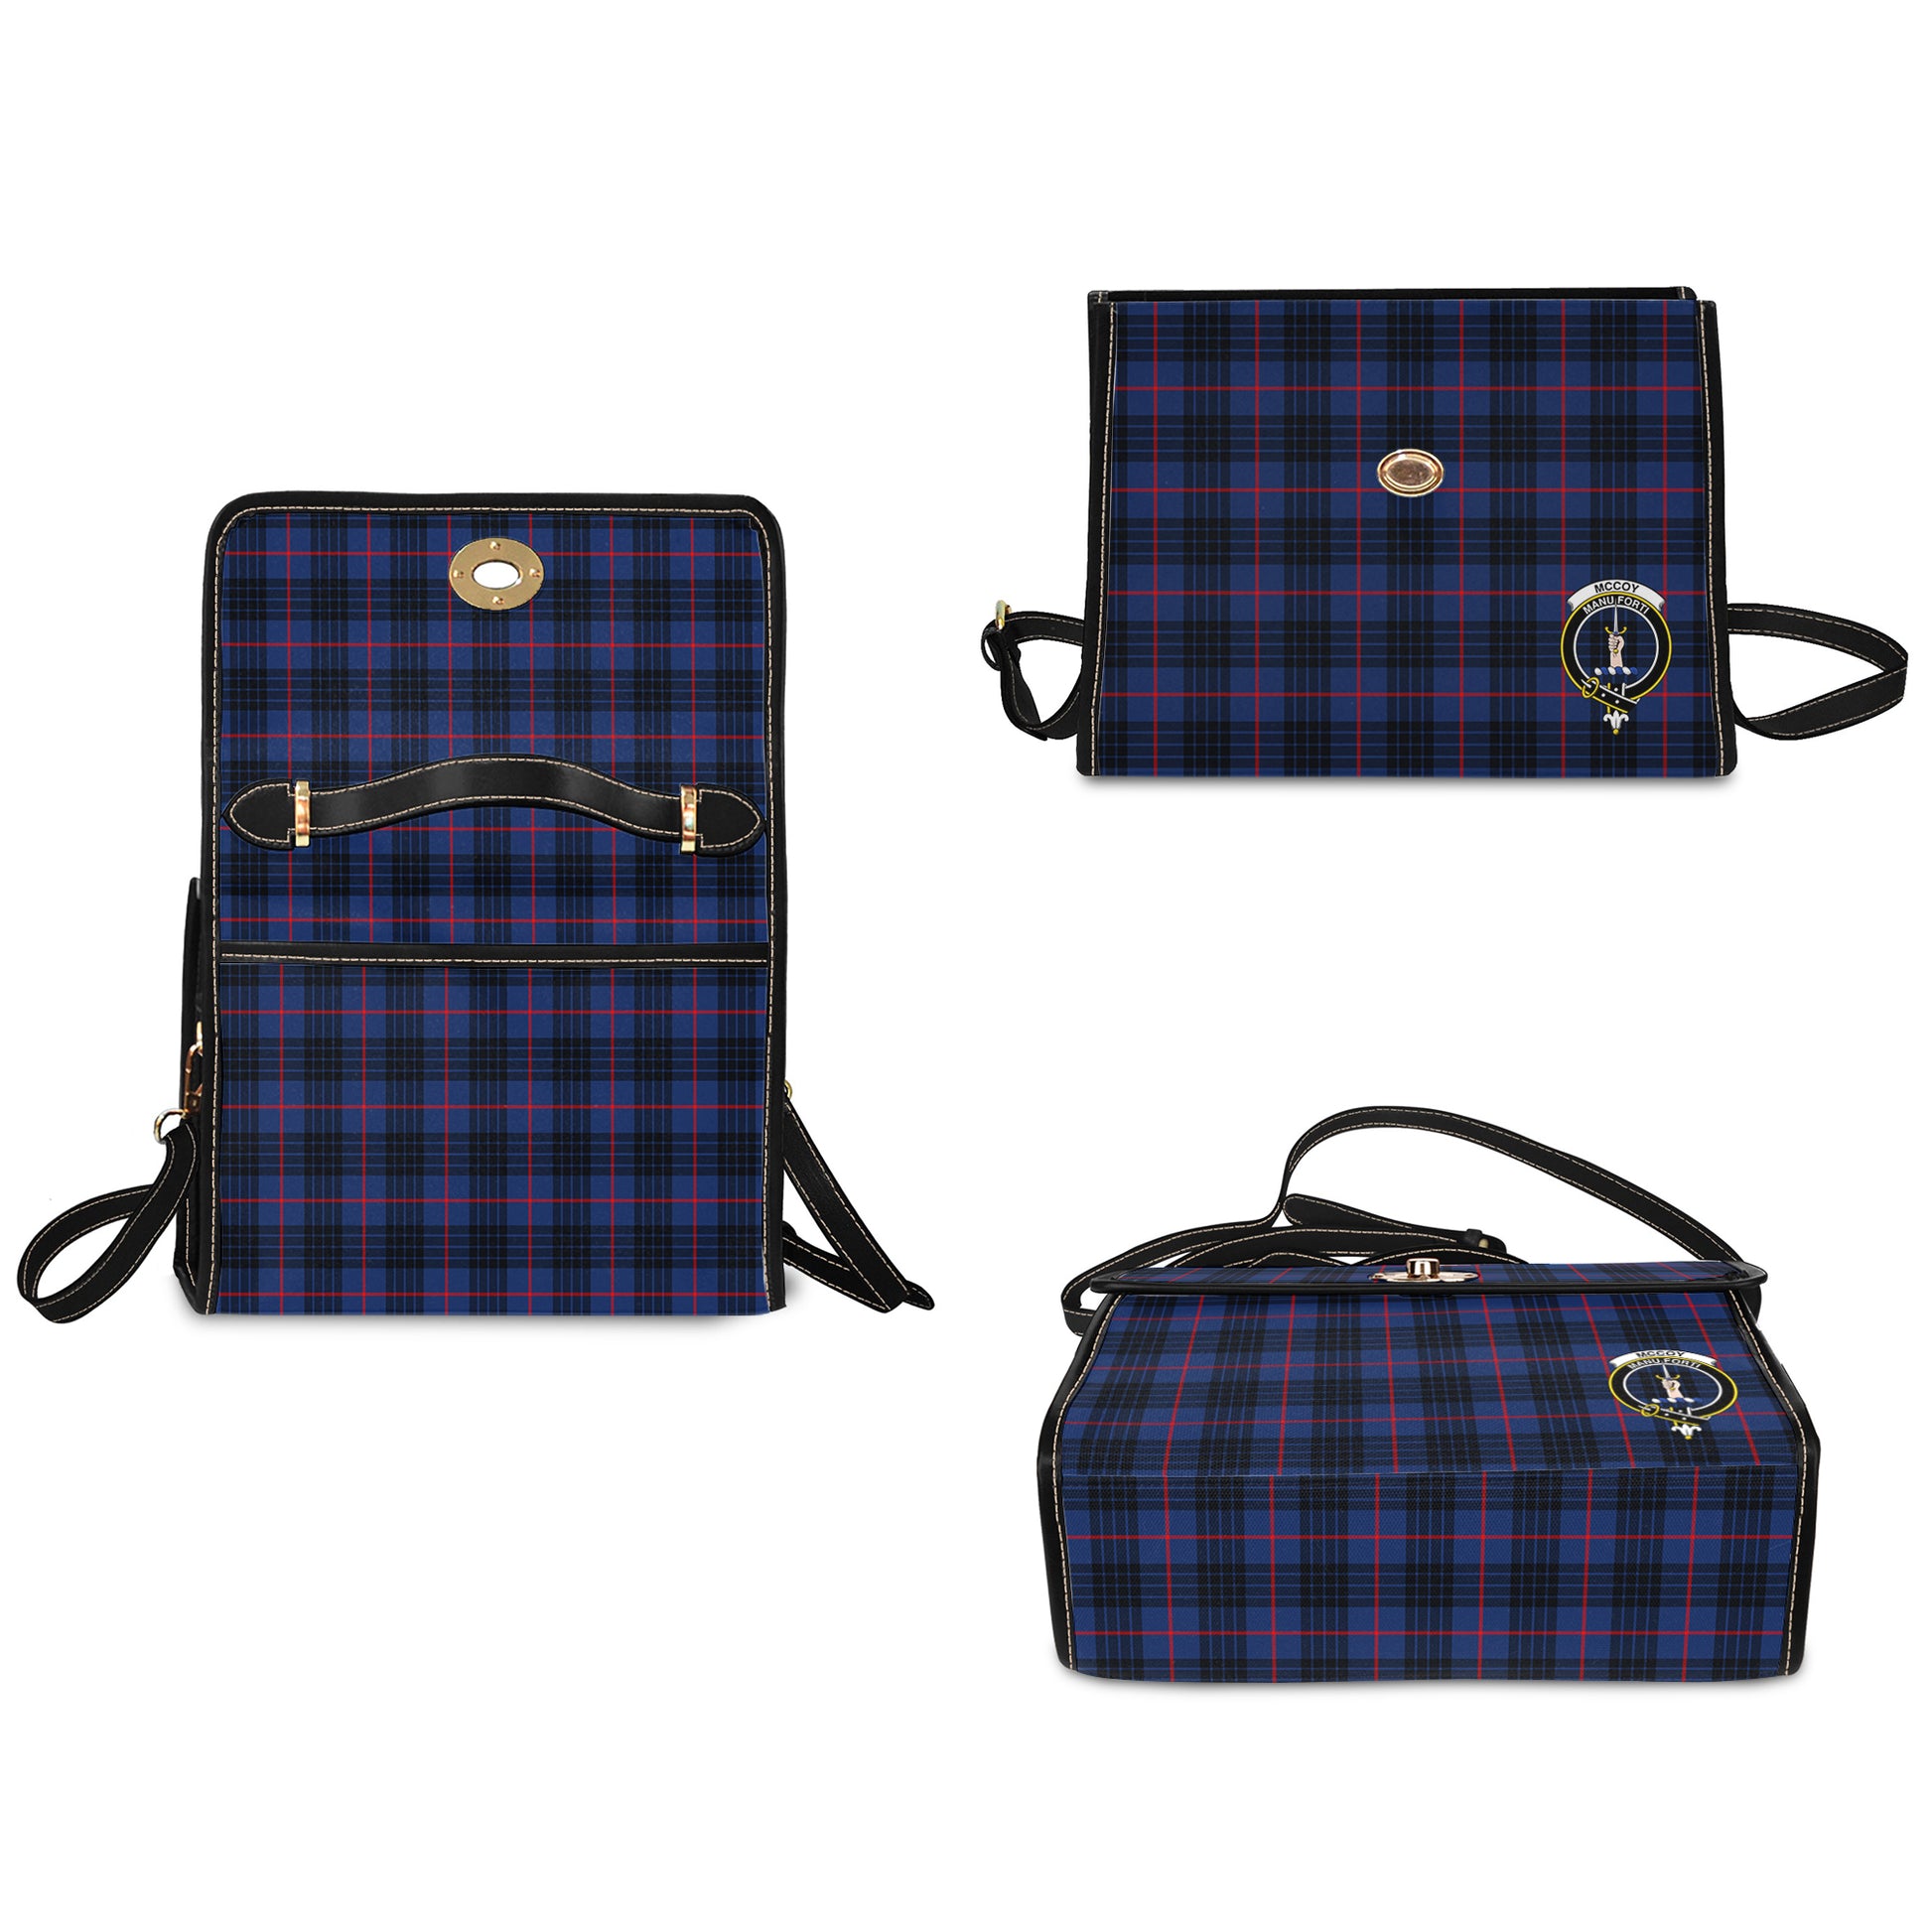 mccoy-blue-tartan-leather-strap-waterproof-canvas-bag-with-family-crest